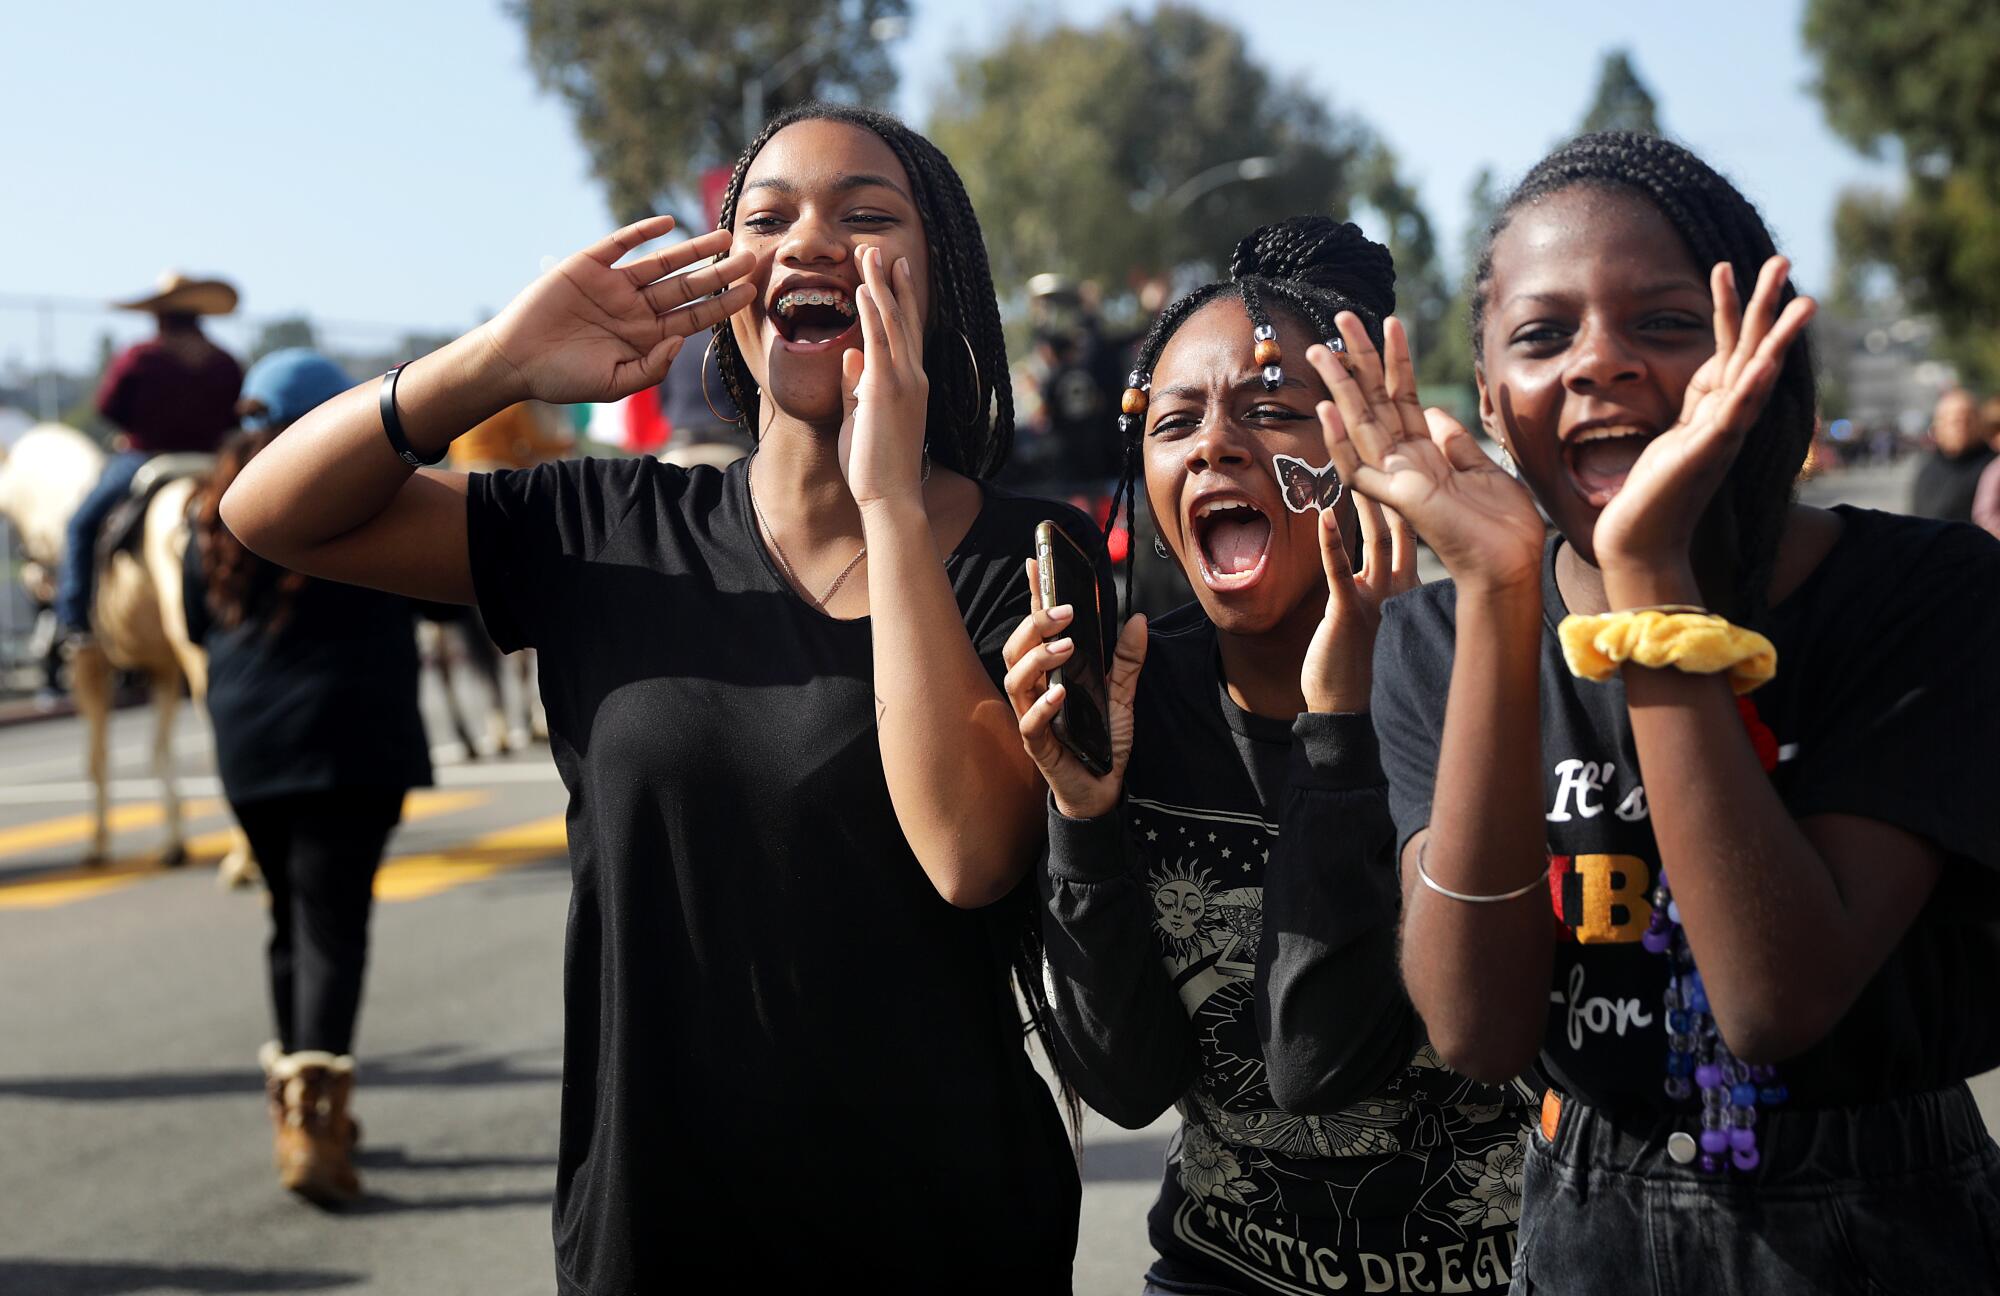 Three girls cheer on a friend participating in the 38th Annual Kingdom Day Parade in Leimert Park